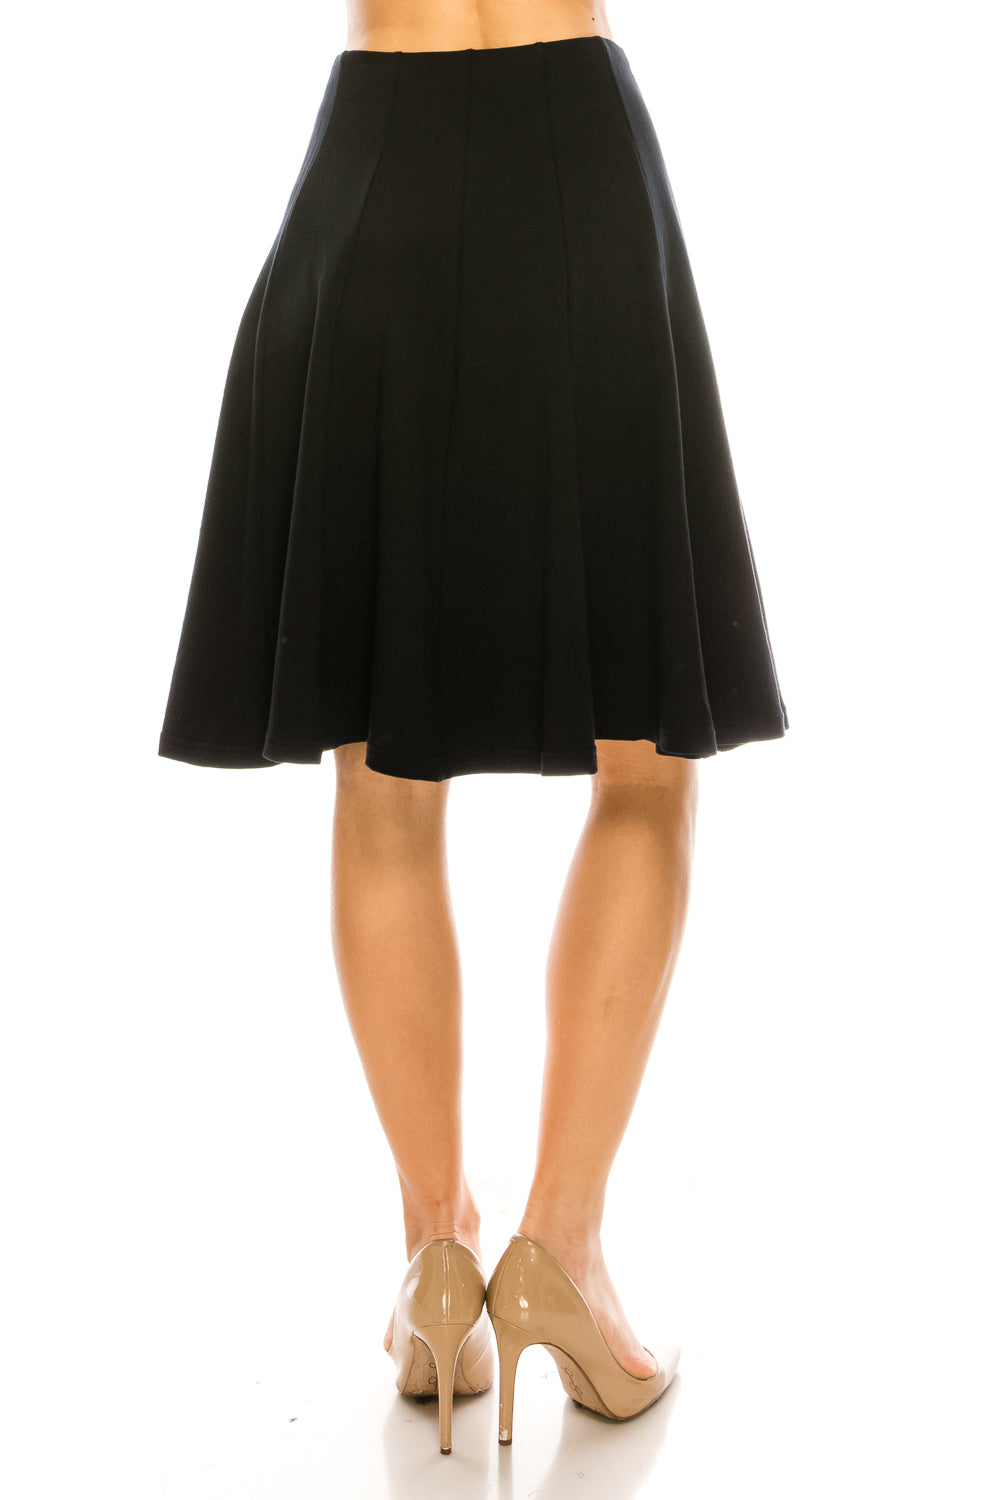 Cotton Flared A-line 12 Paneled Knee Length Skirt - CHI-CHI NYC